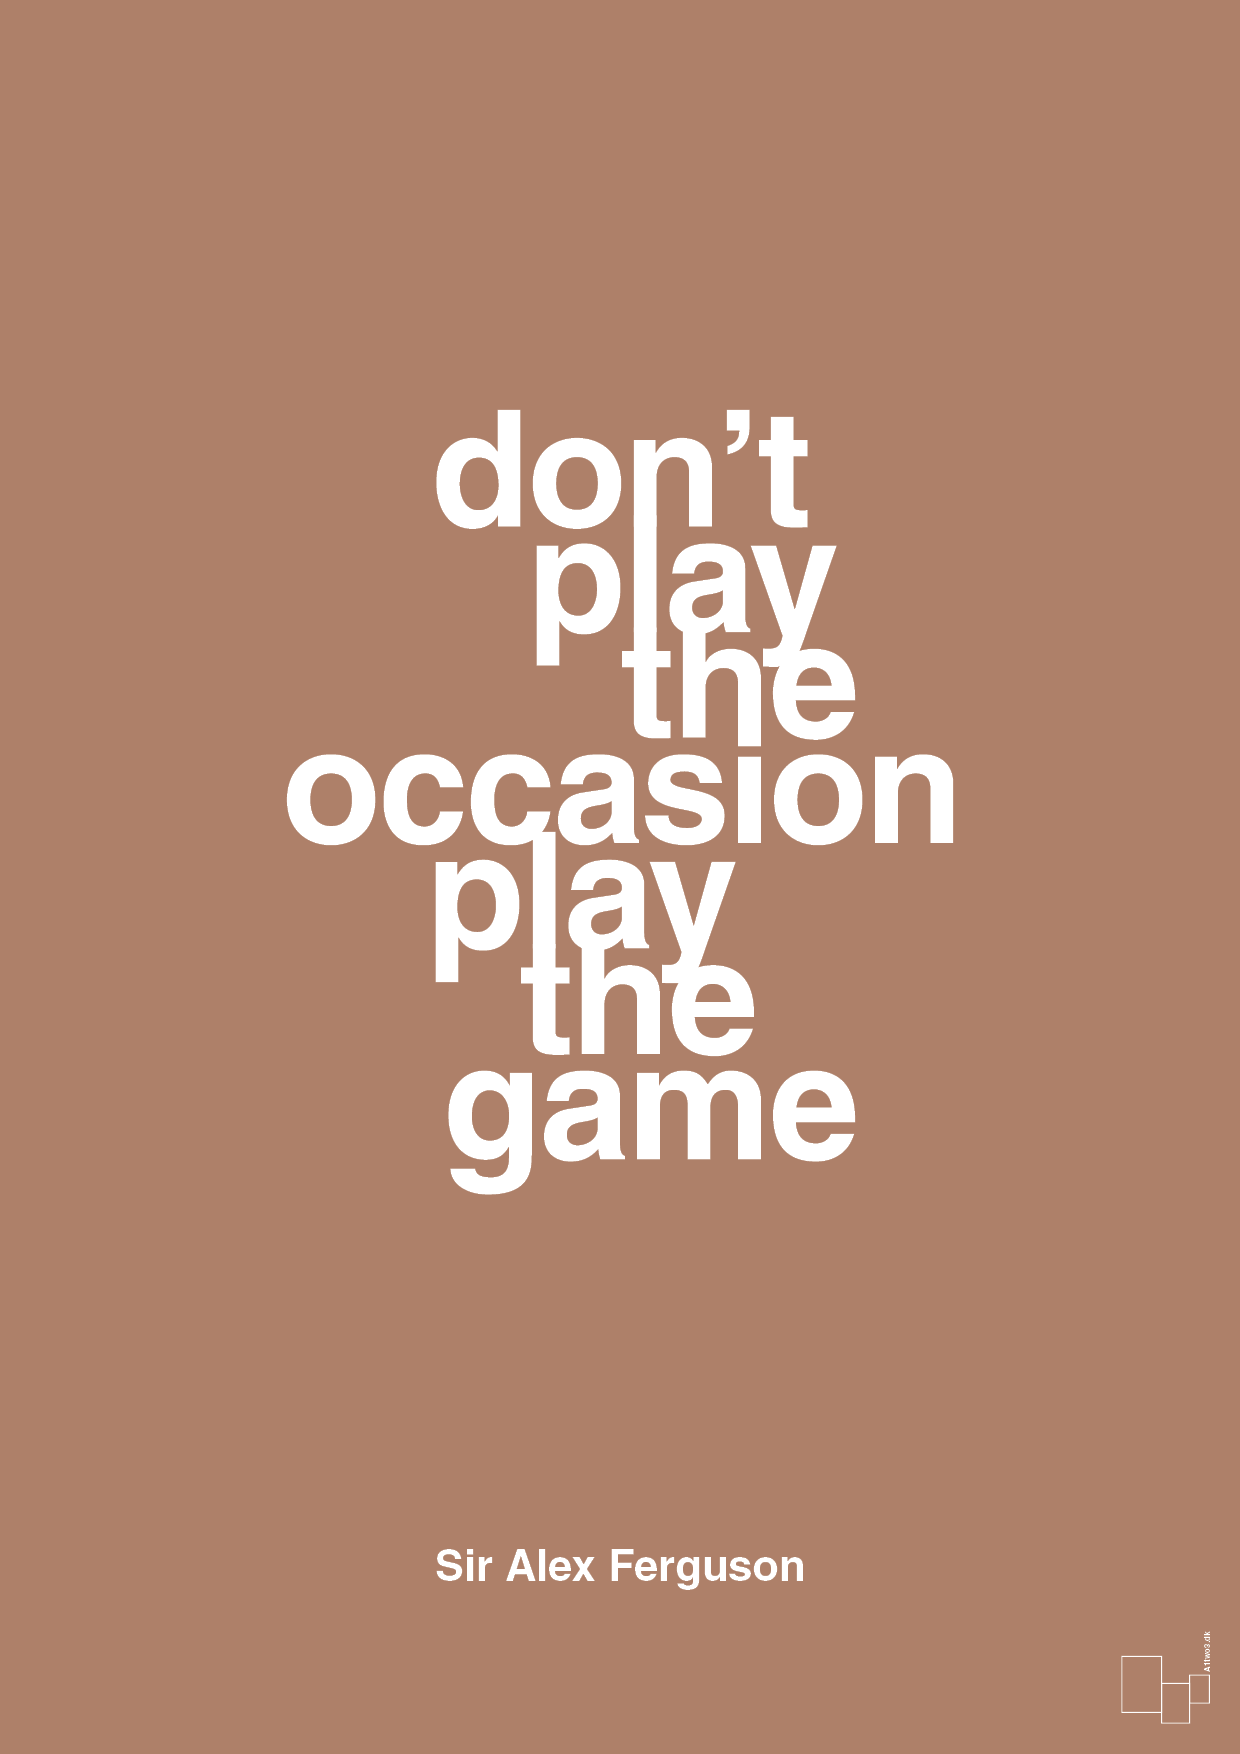 don’t play the occasion play the game - Plakat med Citater i Cider Spice